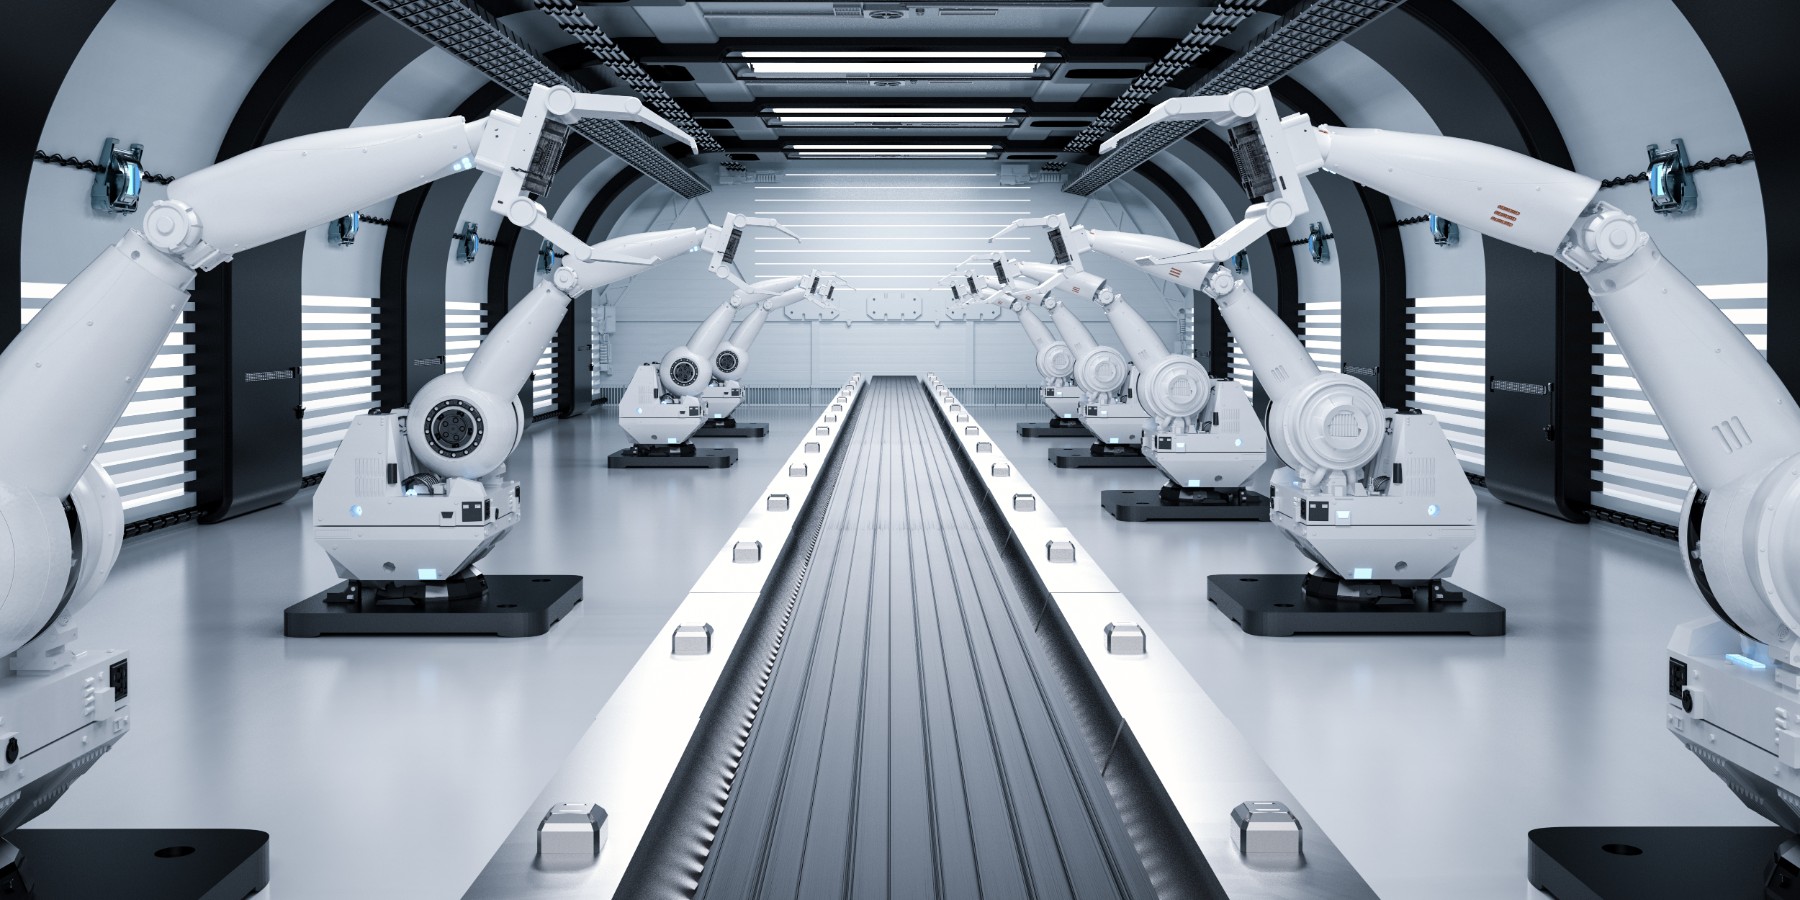 How robotics and IoT are impacting the supply chain